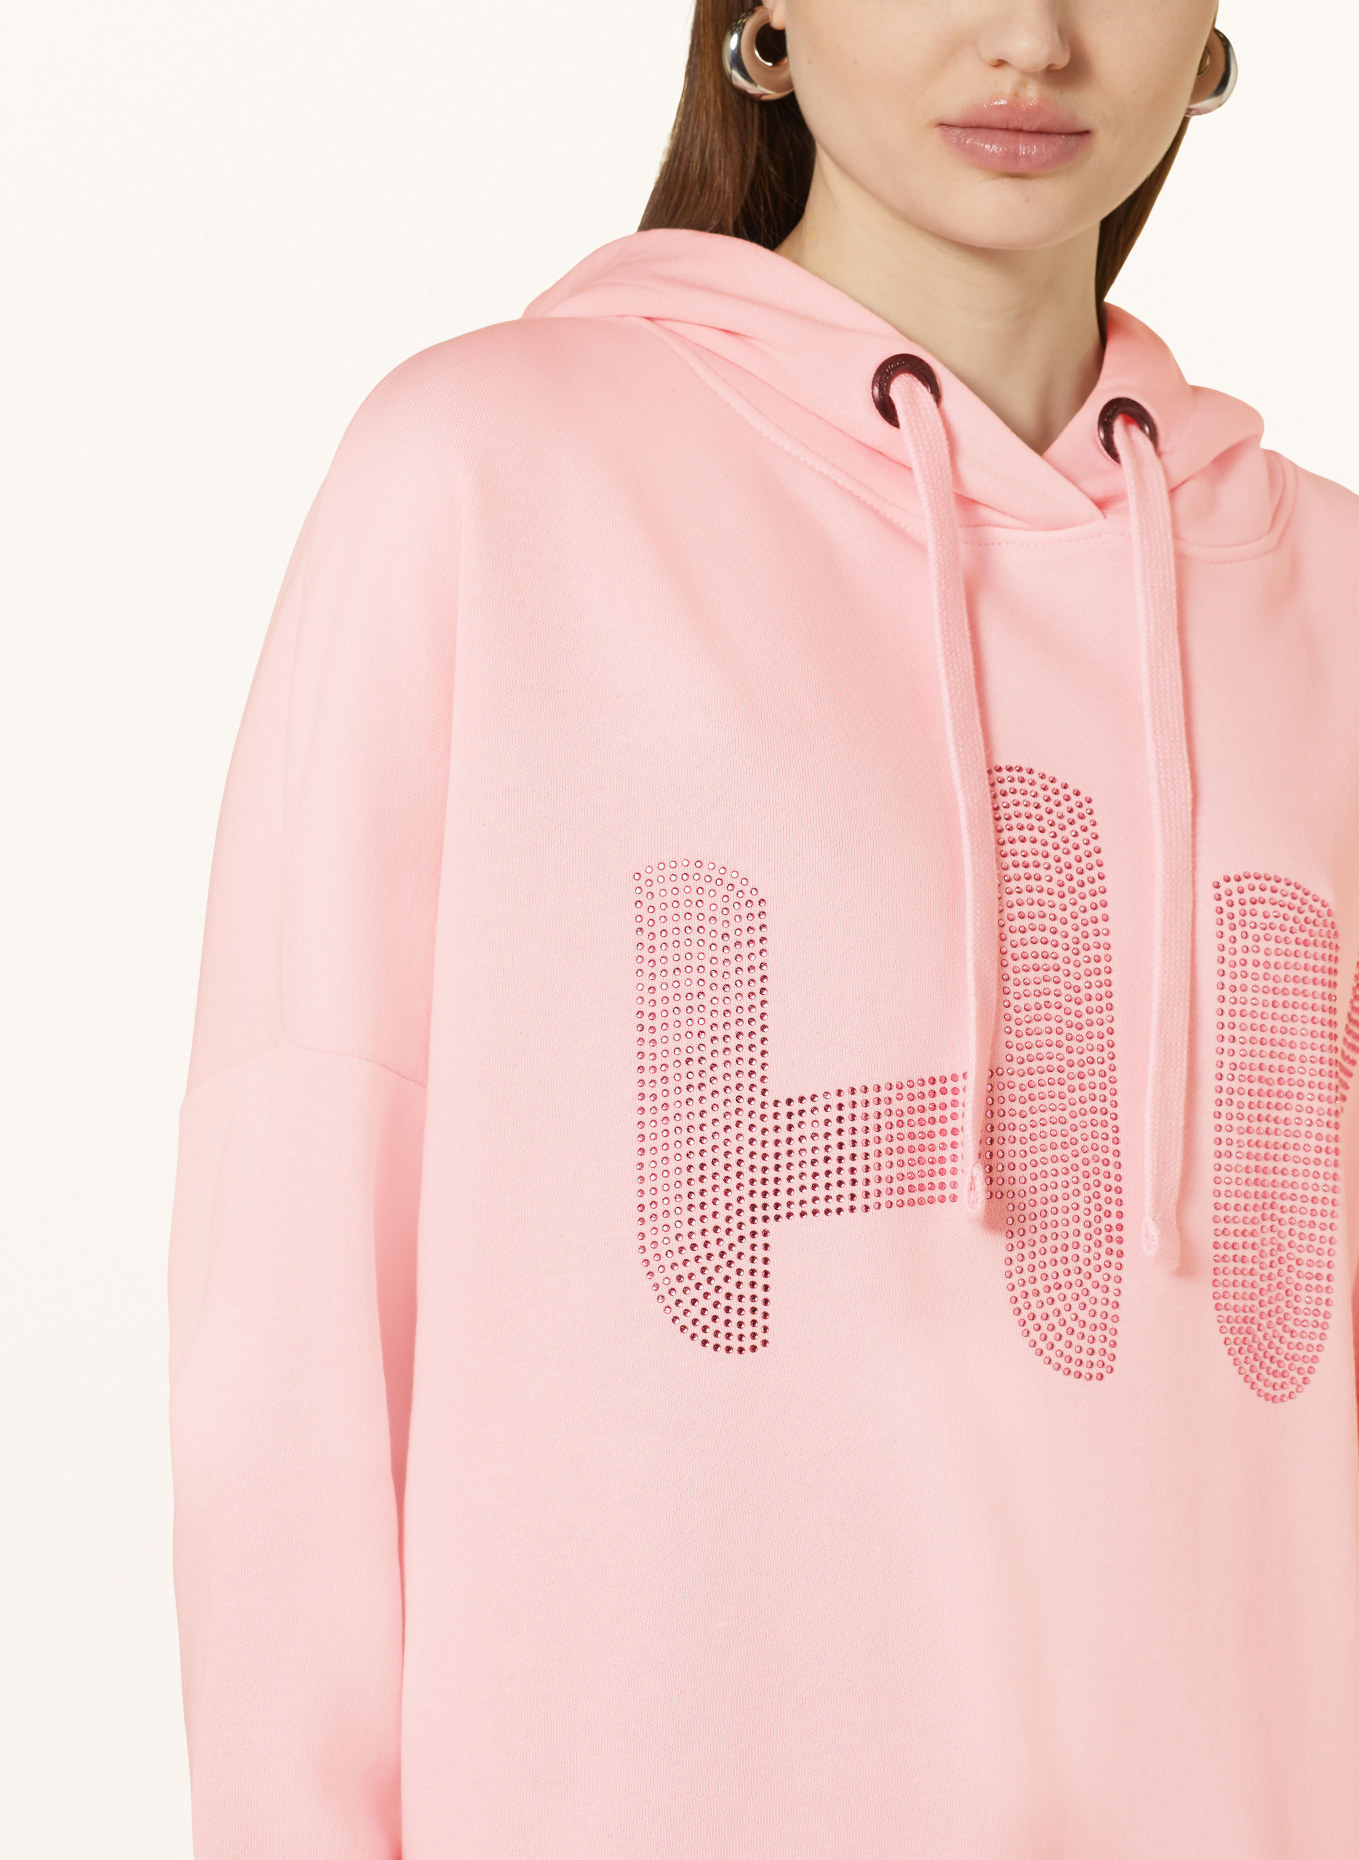 miss goodlife Hoodie with decorative gems, Color: LIGHT PINK (Image 5)